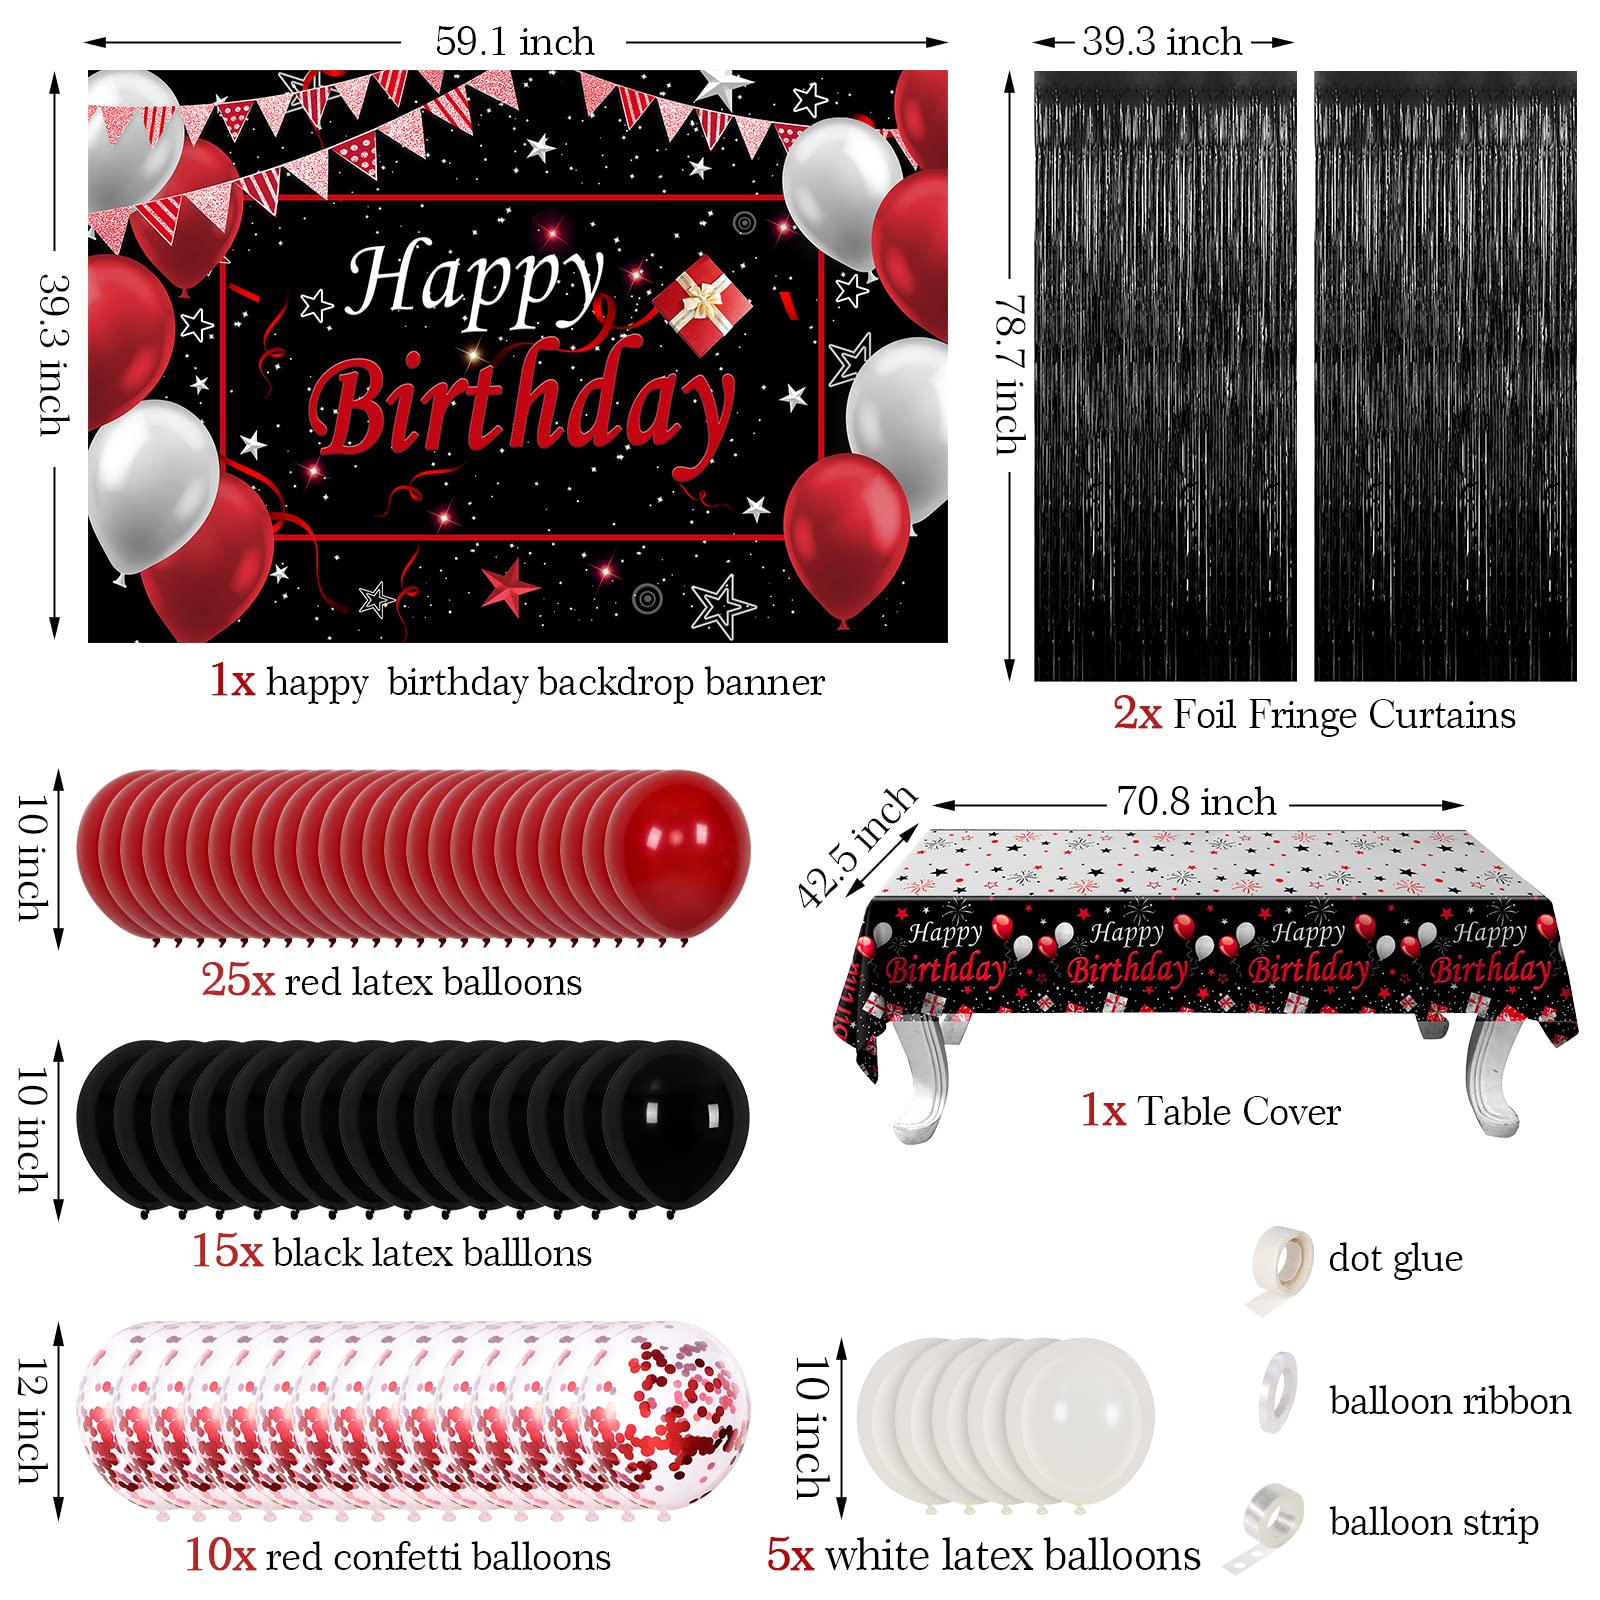 Red and Black Birthday Decorations for Men Women, Happy Birthday Decorations fo Boys Girls Party Decoration Backdrop & Tablecloth Balloons Arch Kit Confetti Balloons Foil Fringe Curtains Table Cover